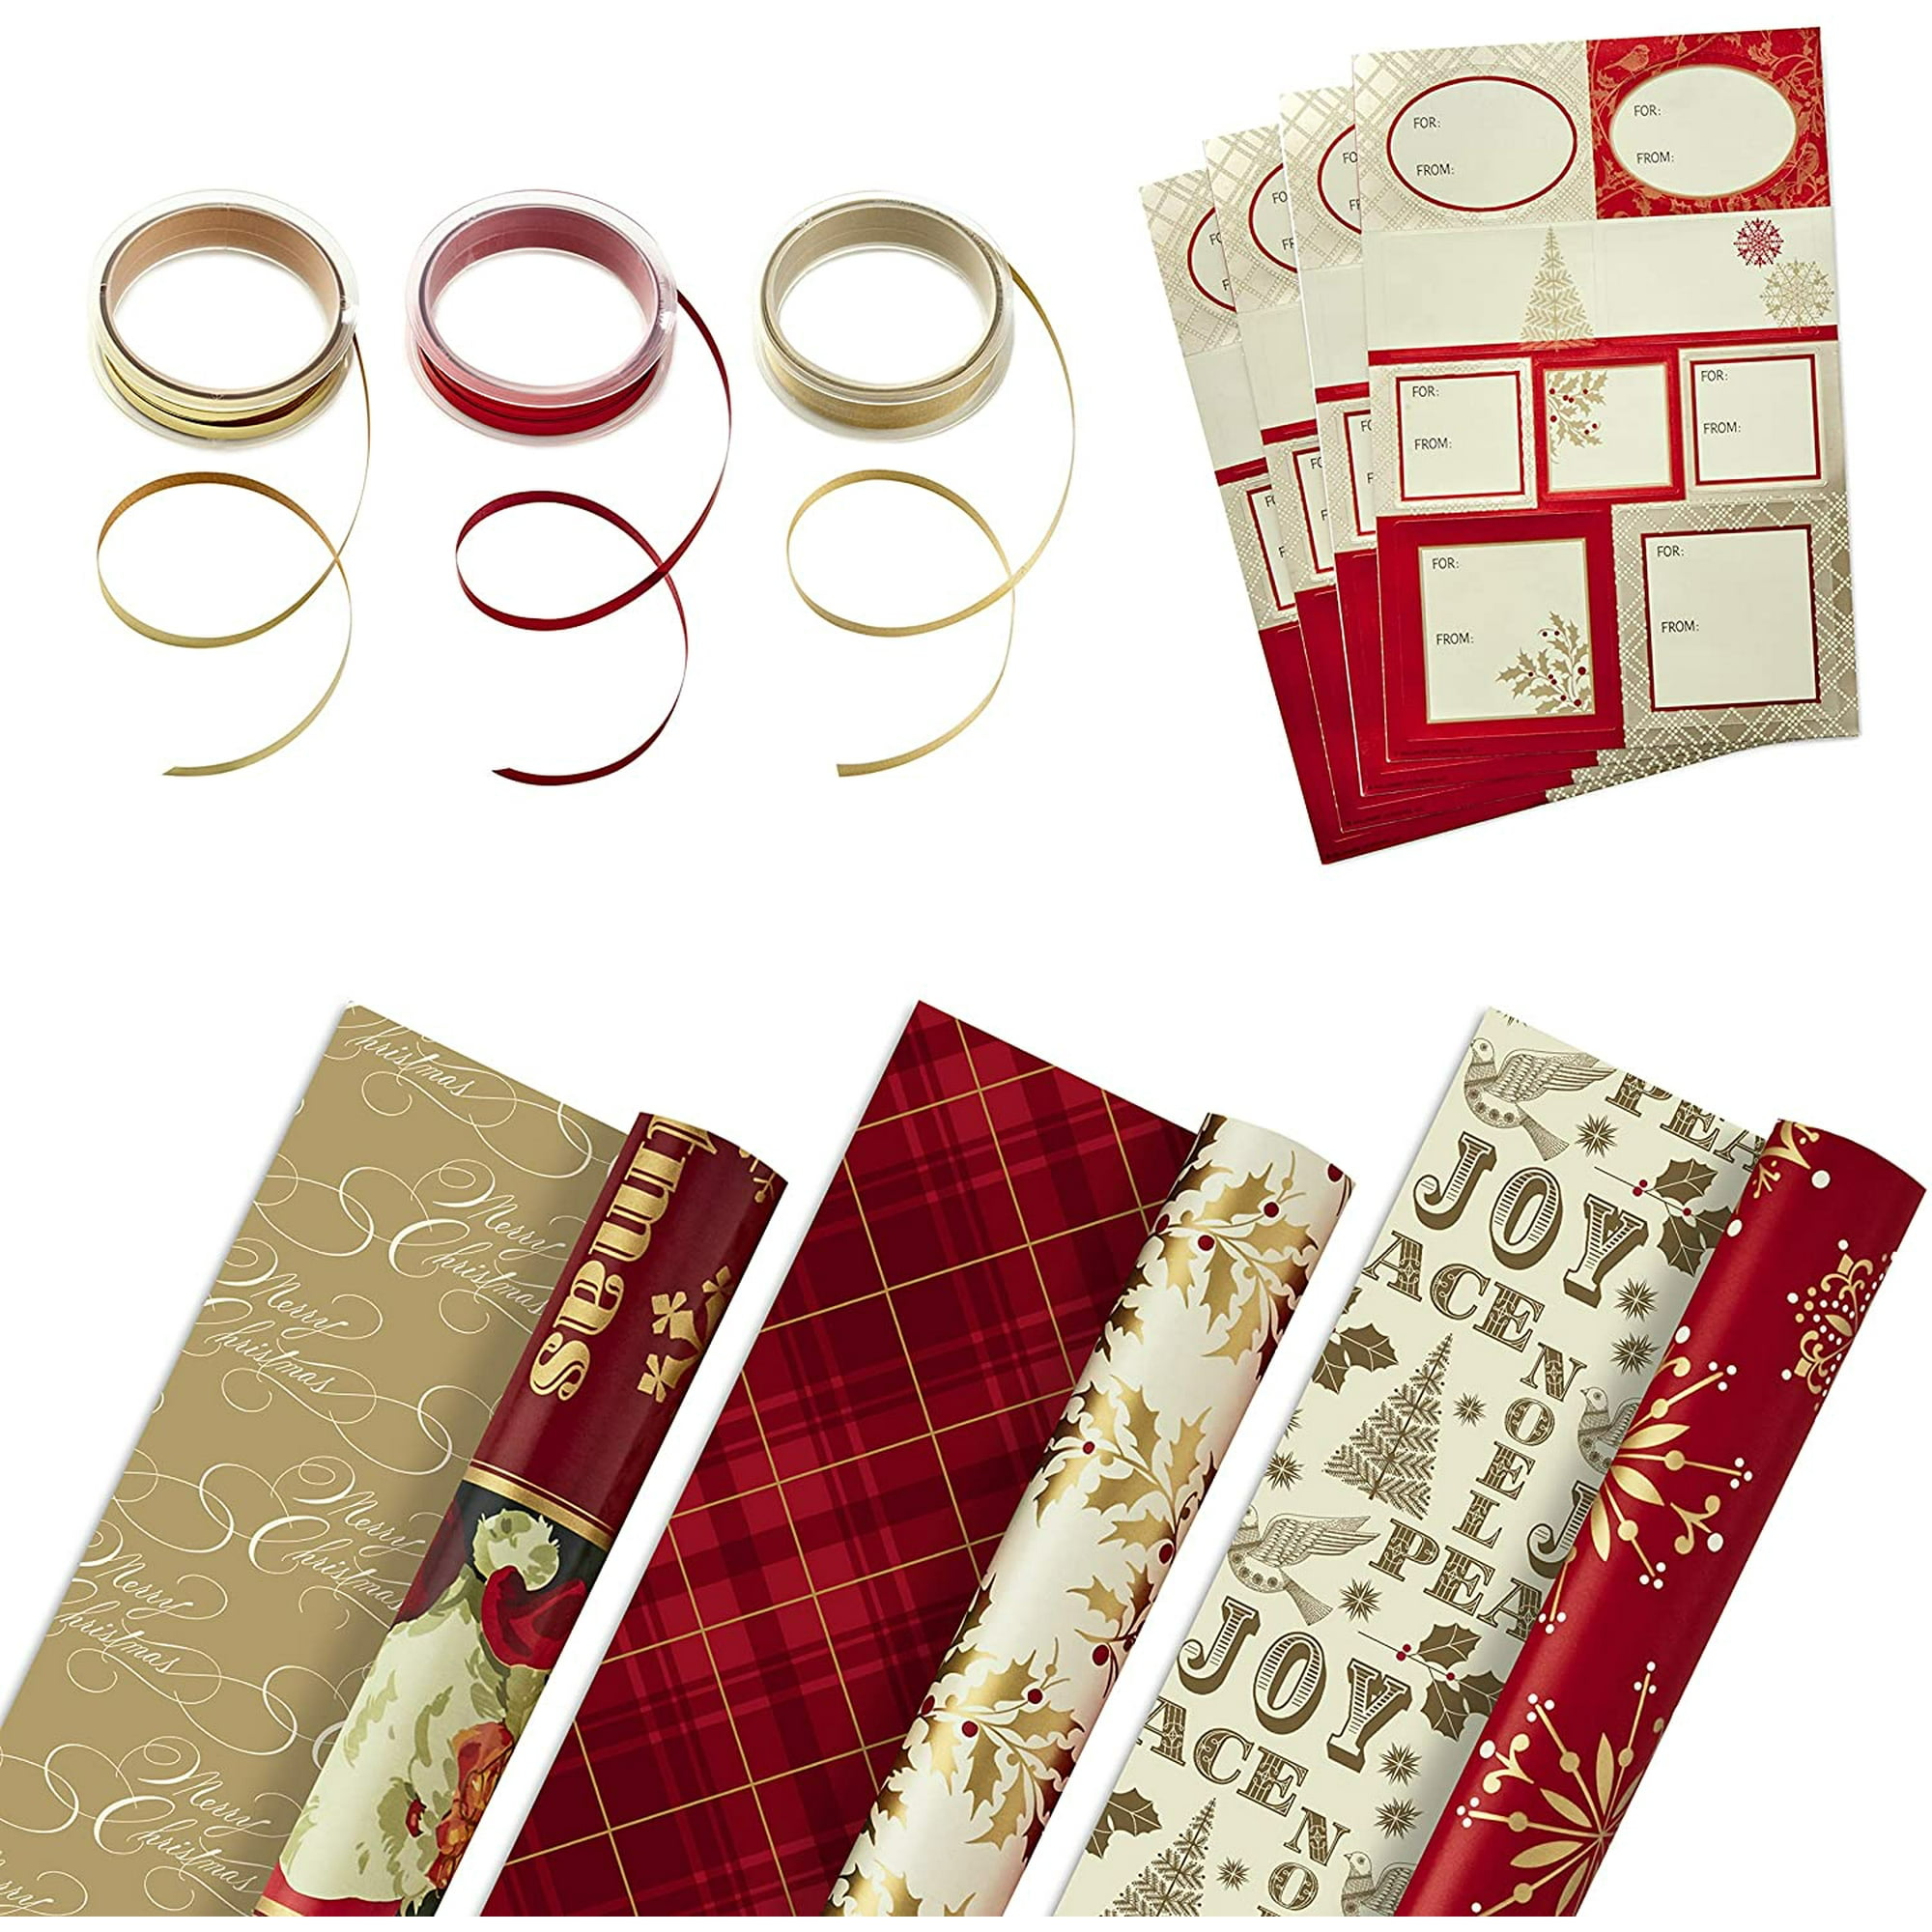 IGUOHAO Reversible Christmas Wrapping Paper Set with and Gift Tag Stickers (Traditional Red Gold, 3 Rolls of Wrapping Paper and Ribbon) Red and Gold, 3 Pack w/ Accessories - | Walmart Canada